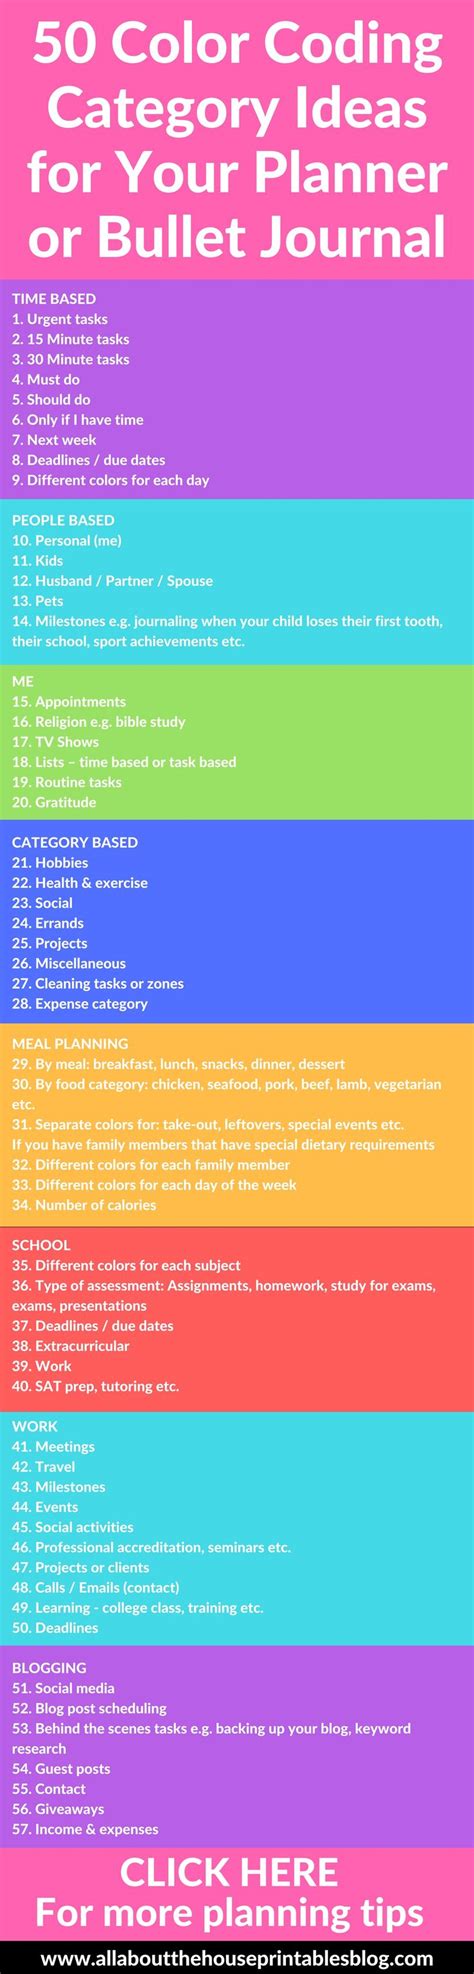 50 Category Ideas for Color Coding Your Planner | Paper crafts | Bullet journal, Bullet journal ...